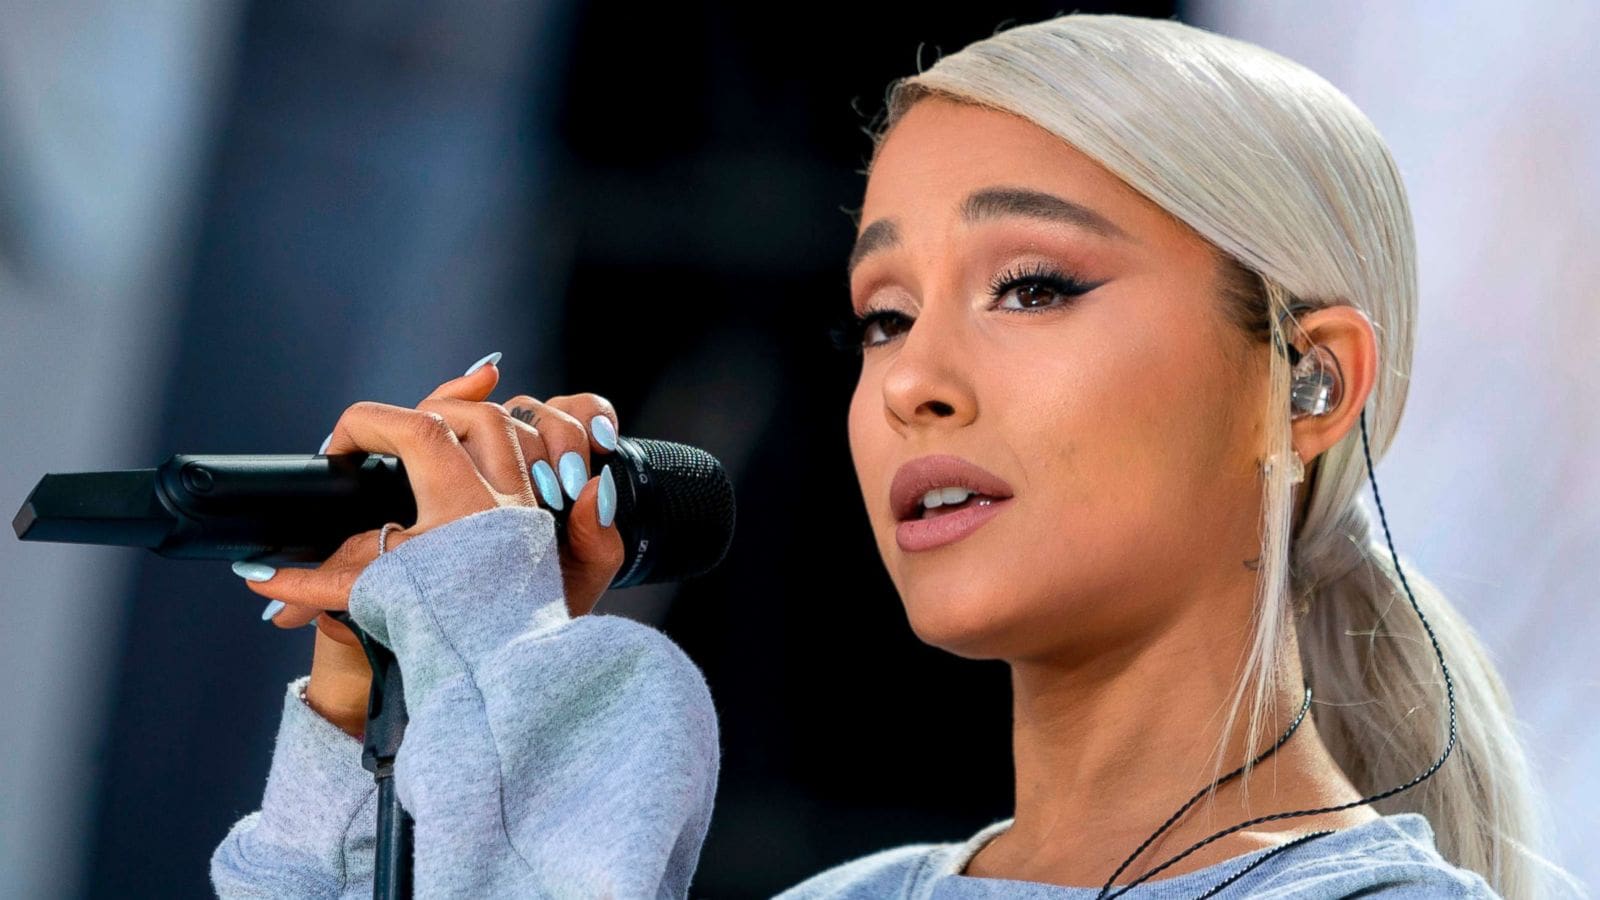 Ariana Grande Shows Off Her Natural Short Curly Hair And Fans Gush Over Her Cuteness ...